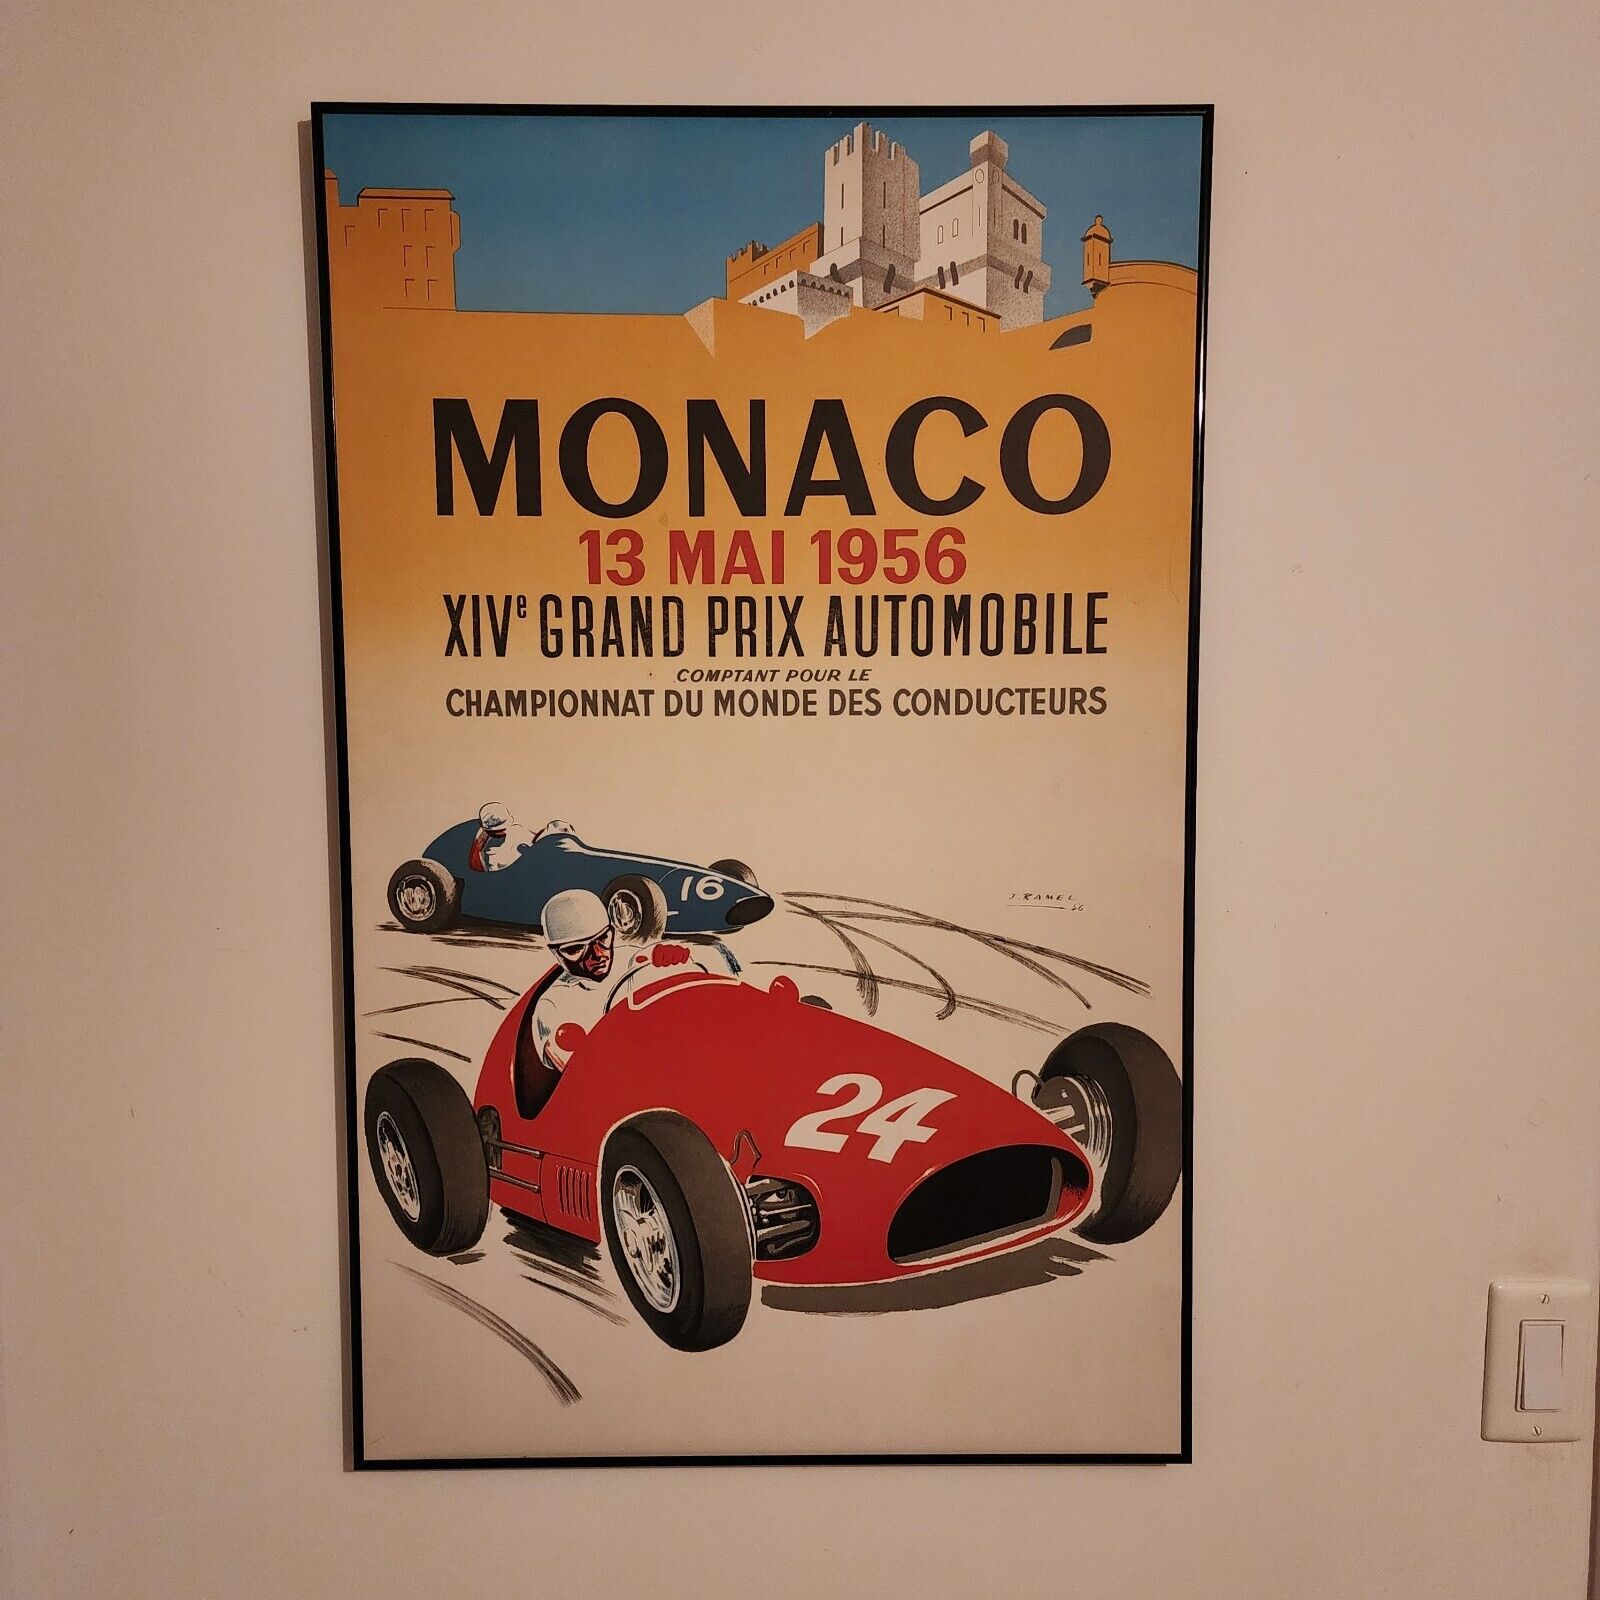 Vintage Lithographic Poster Monaco Grand Prix 1956, May 13 Signed J. Ramel